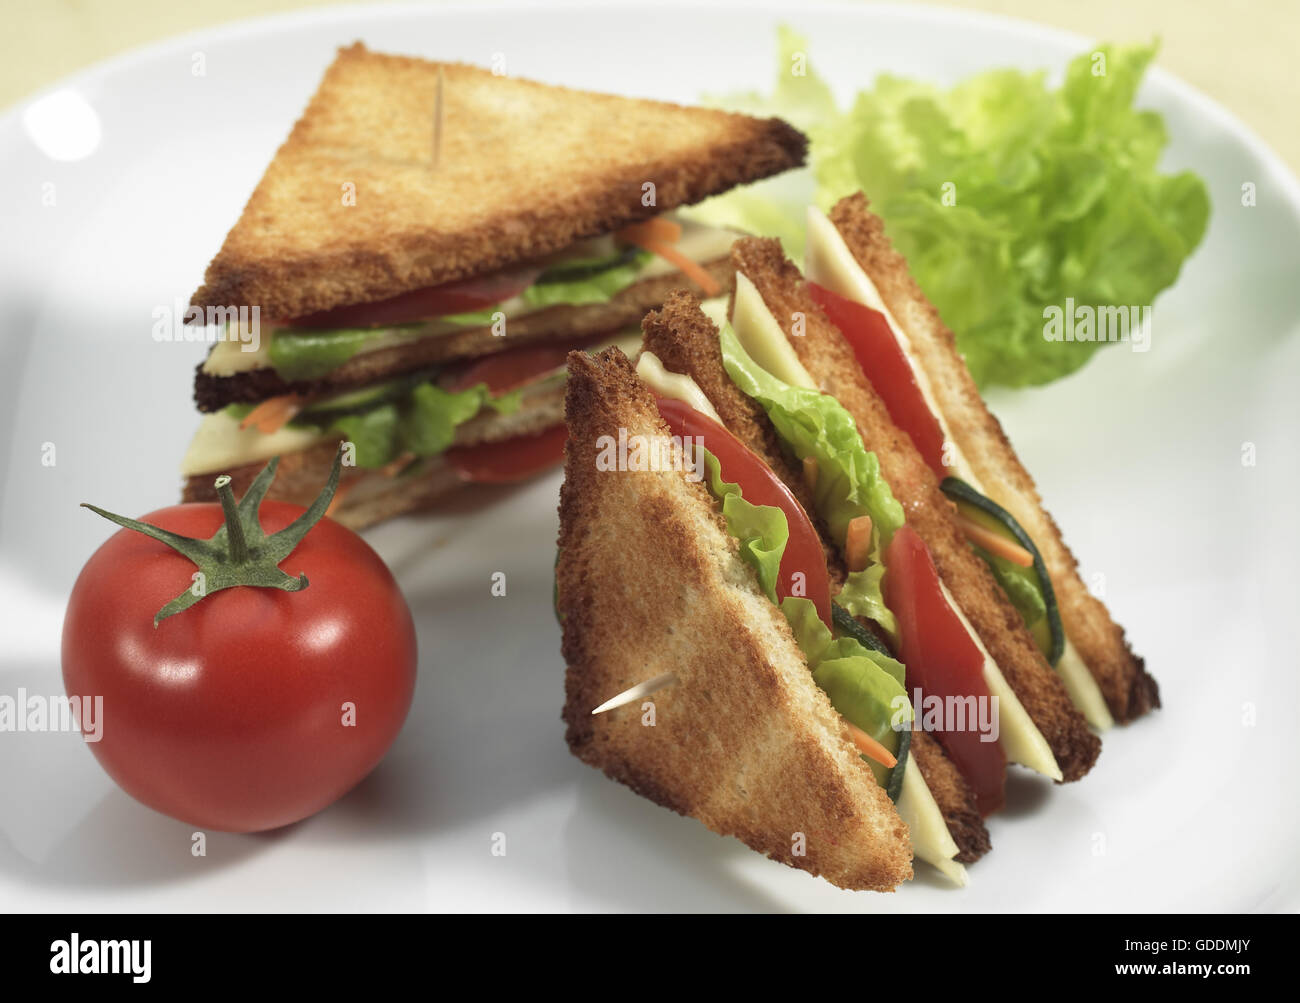 Fast Food, Club Sandwich with Salad and Tomato Stock Photo